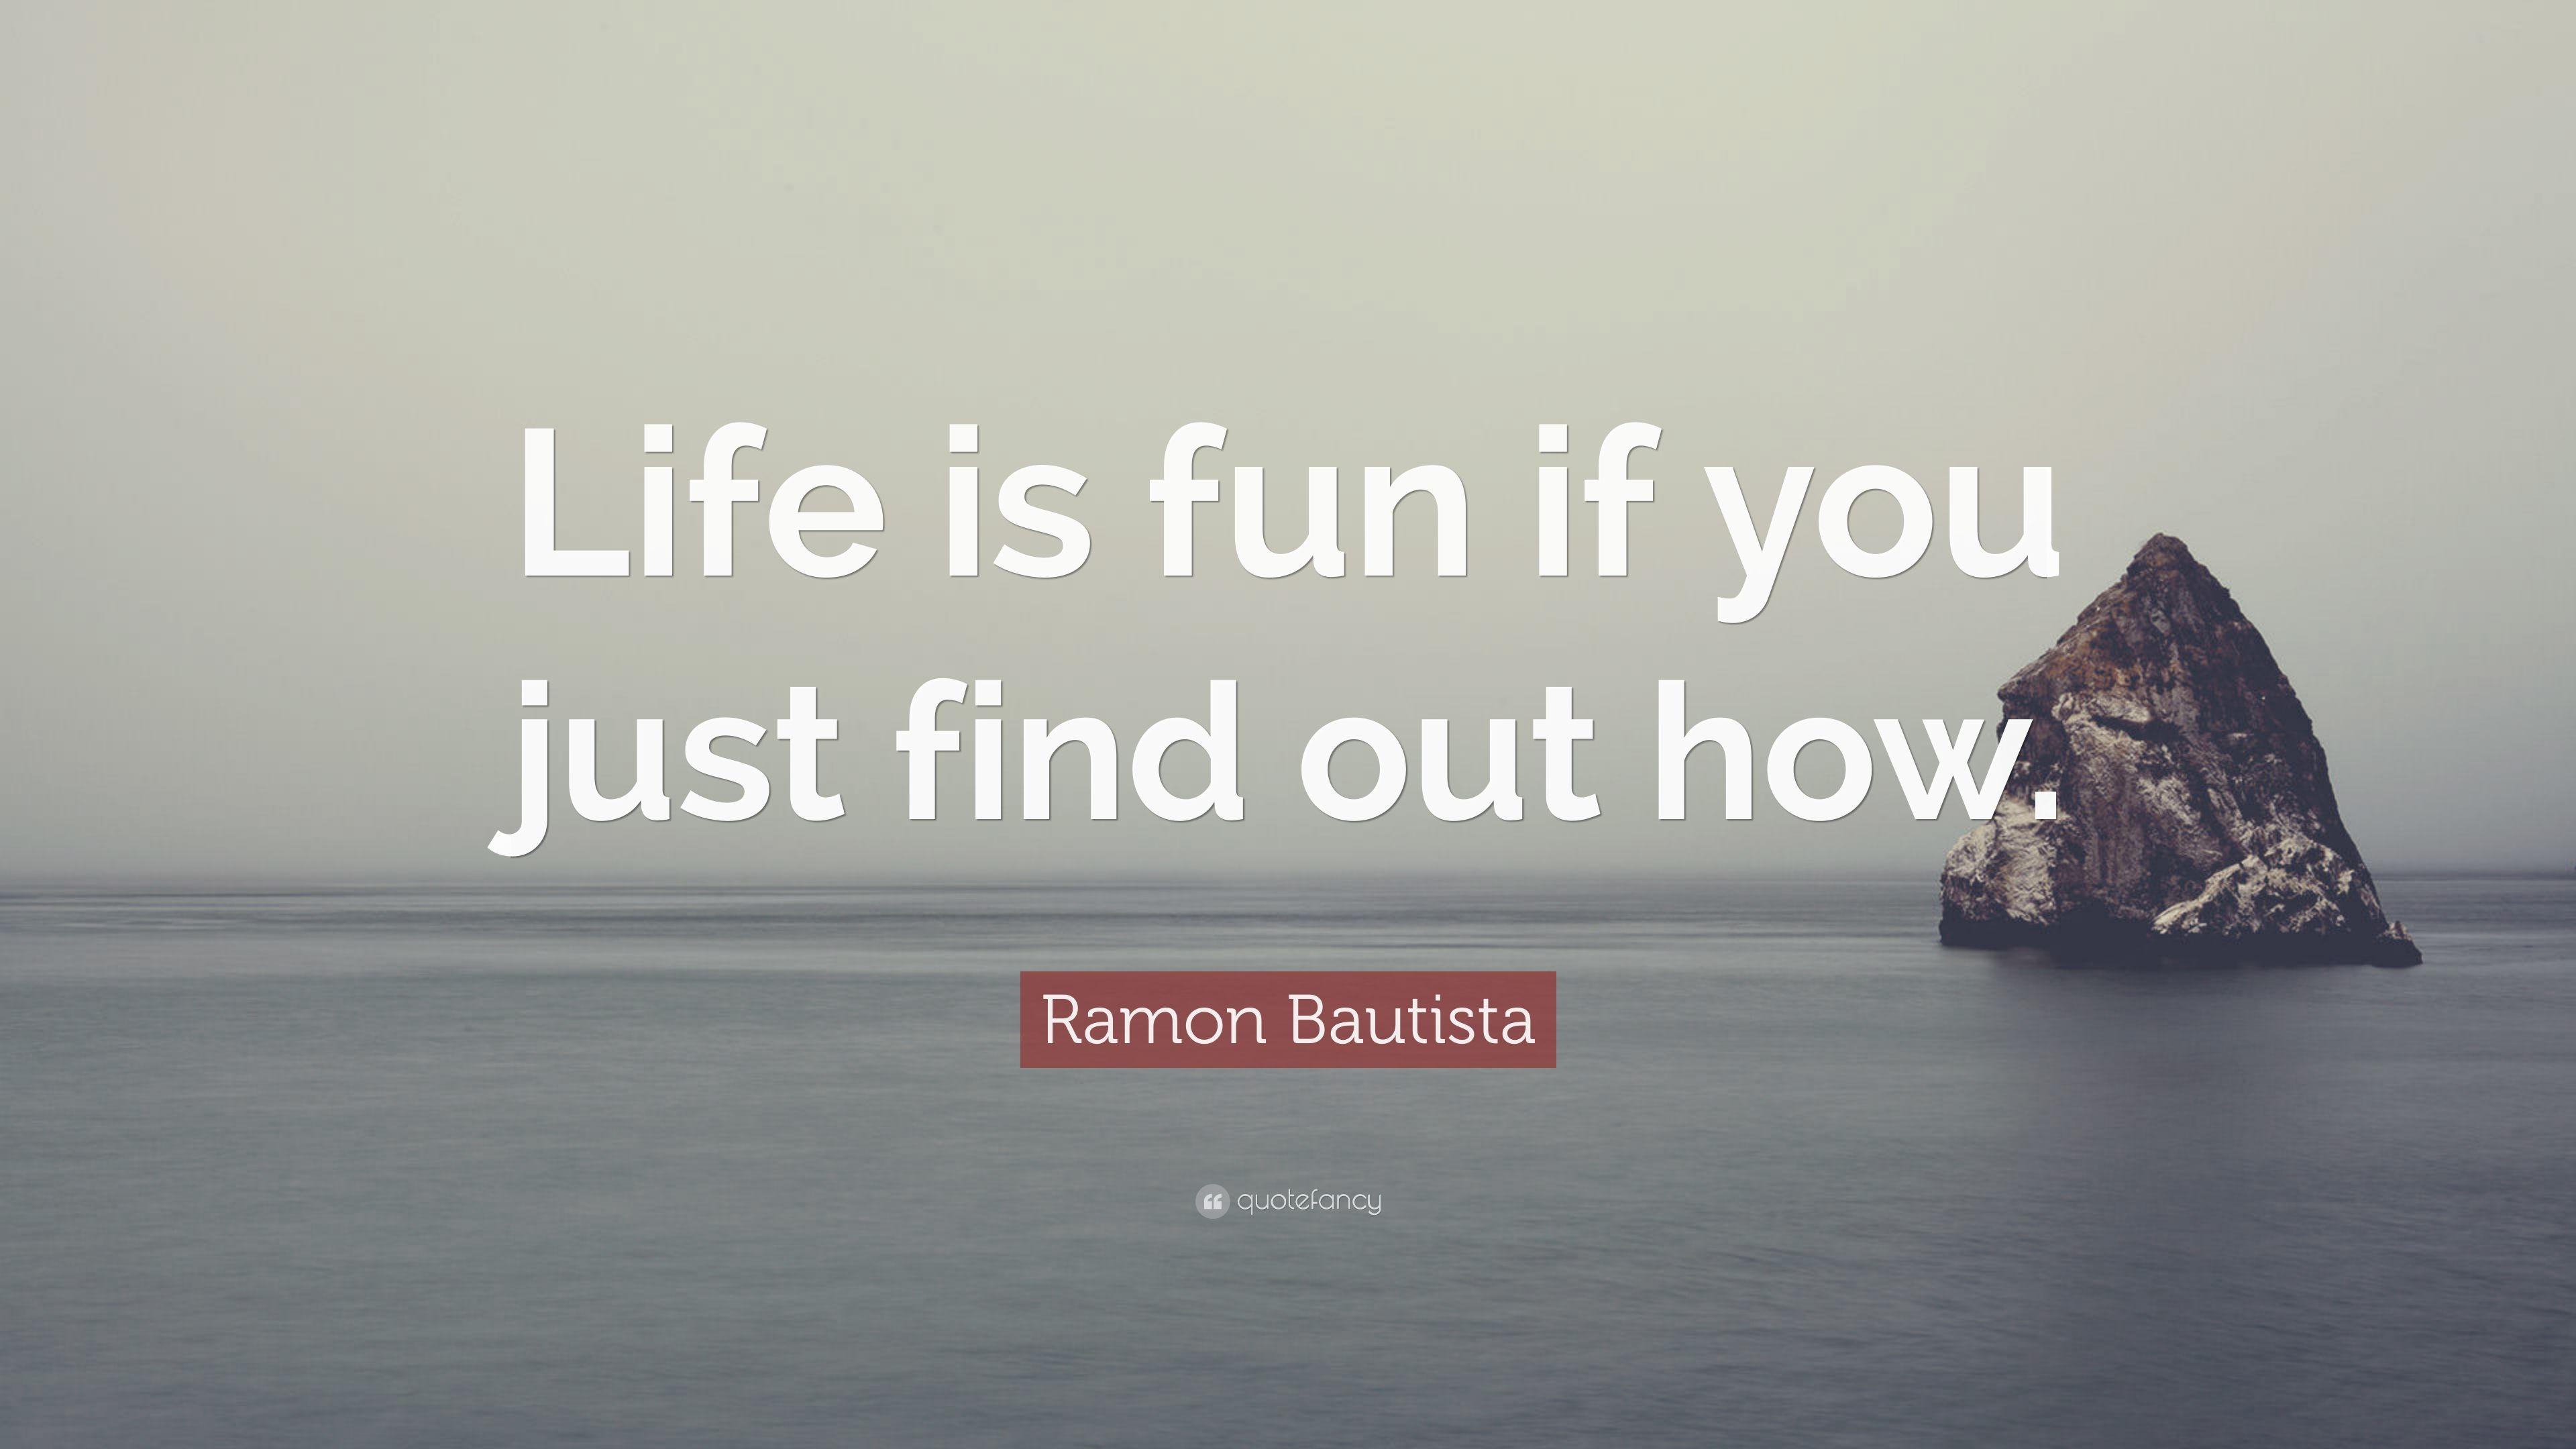 Ramon Bautista Quote: "Life is fun if you just find out how 